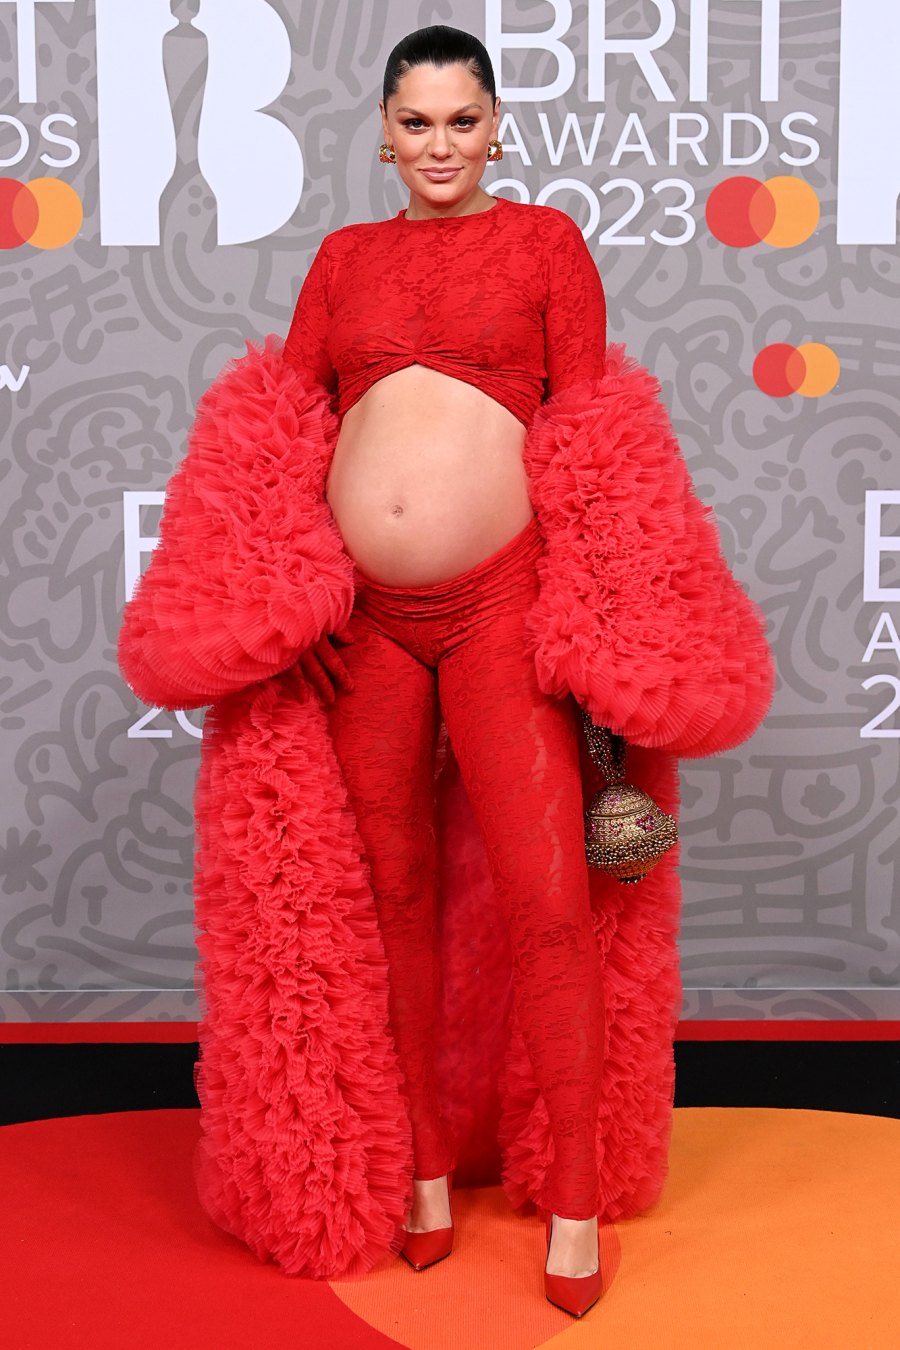 Brits Baby! Pregnant Jessie J Shows Off Her Bare Bump at 2023 Awards Show